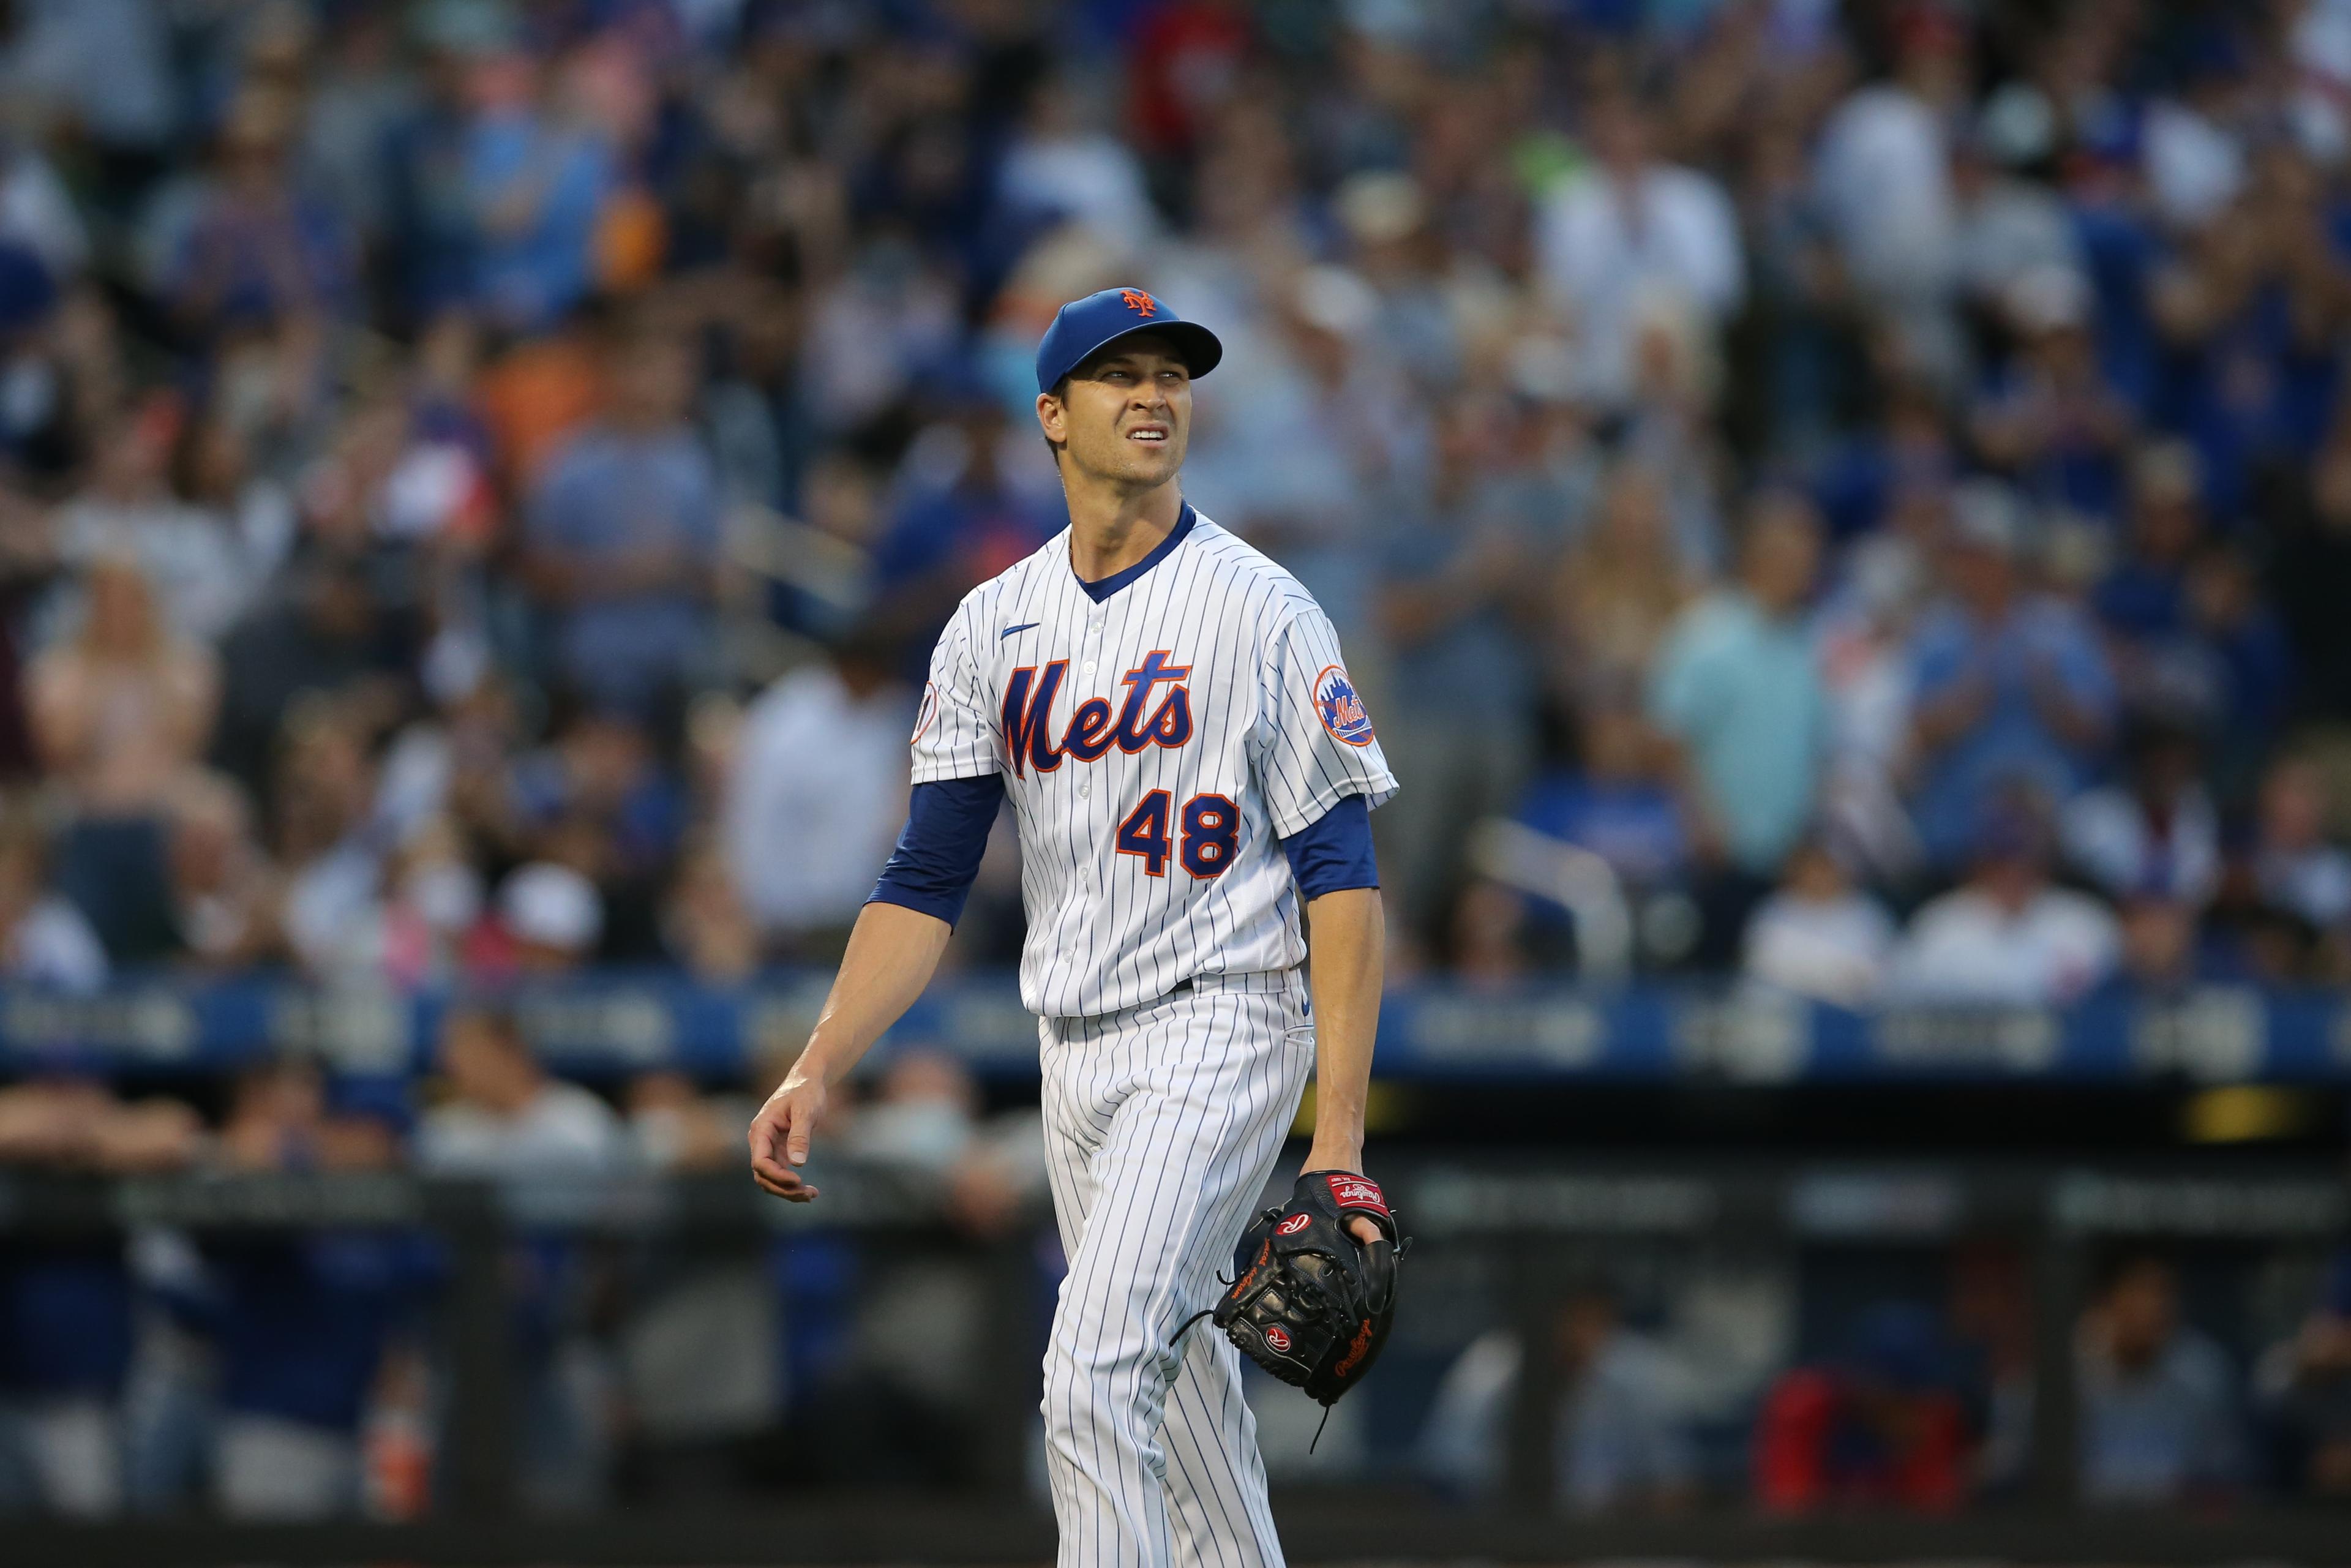 Jun 16, 2021; New York City, New York, USA; New York Mets starting pitcher Jacob deGrom (48) reacts as he walks off the field after the top of the third inning against the Chicago Cubs at Citi Field. He would then leave the game with an injury. / Brad Penner-USA TODAY Sports